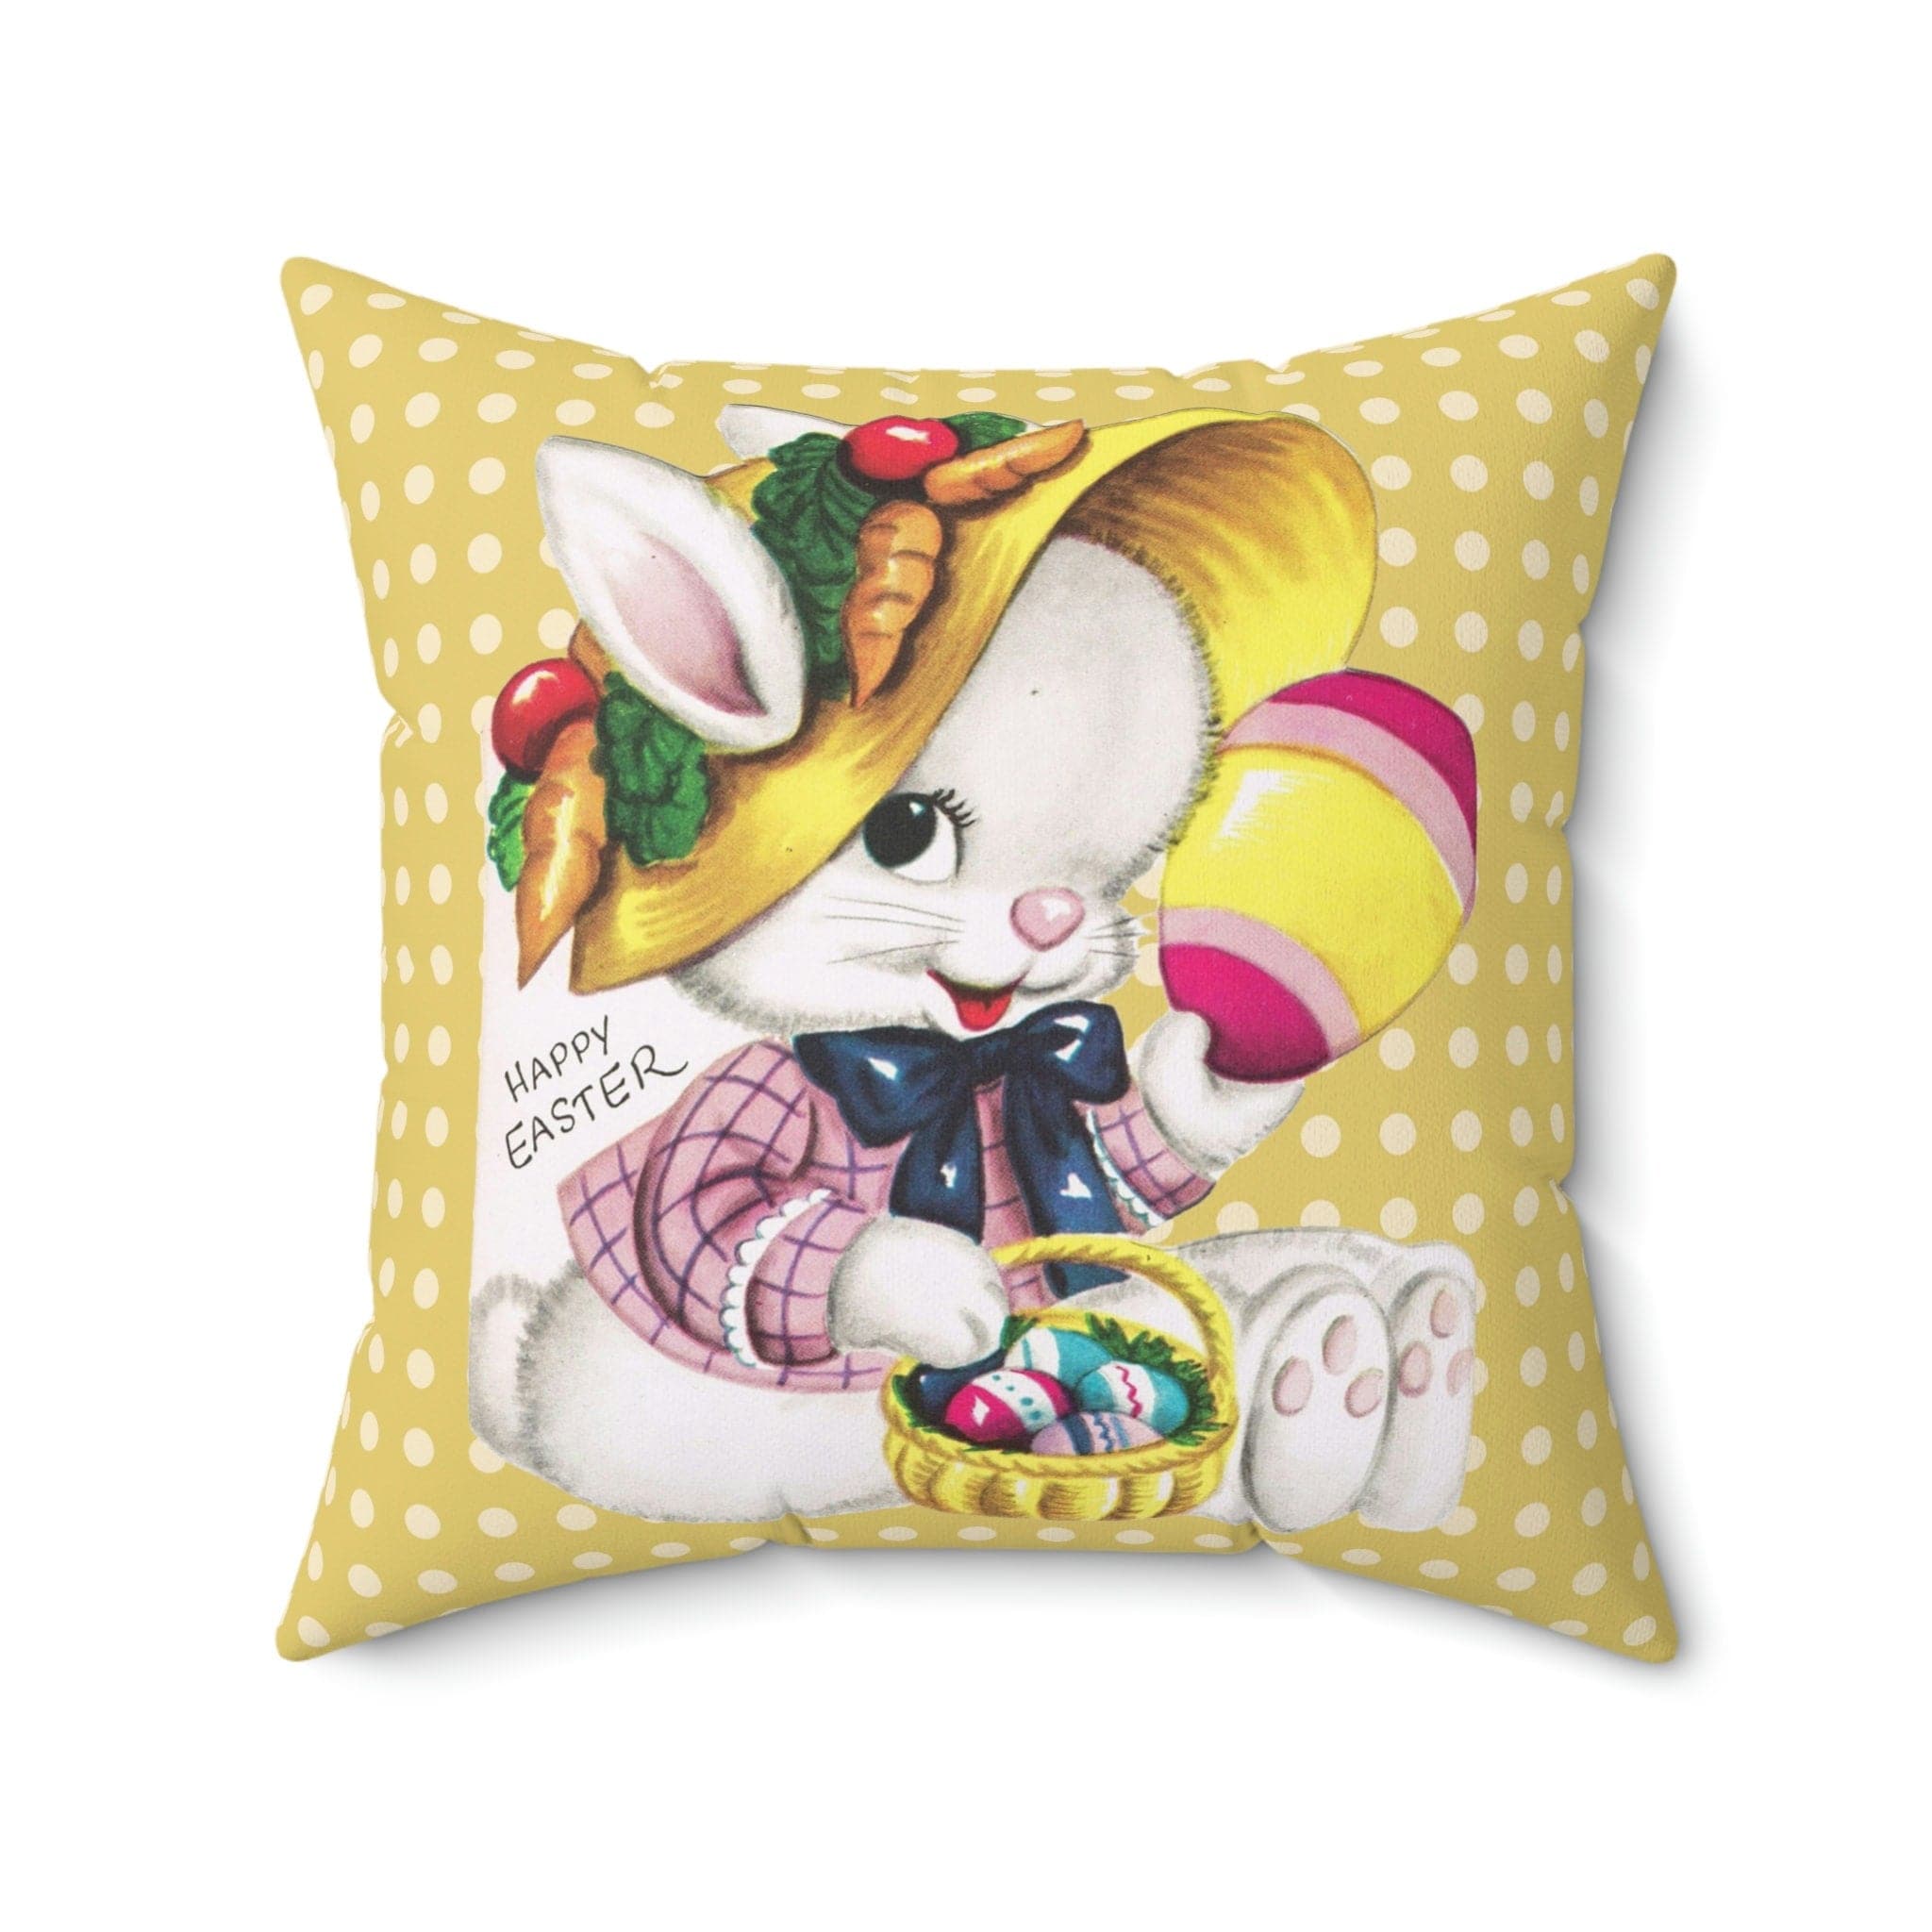 Kate McEnroe New York Vintage Bunny Rabbit Easter Card Inspired Throw Pillow CoverThrow Pillow Covers19948925561036505831